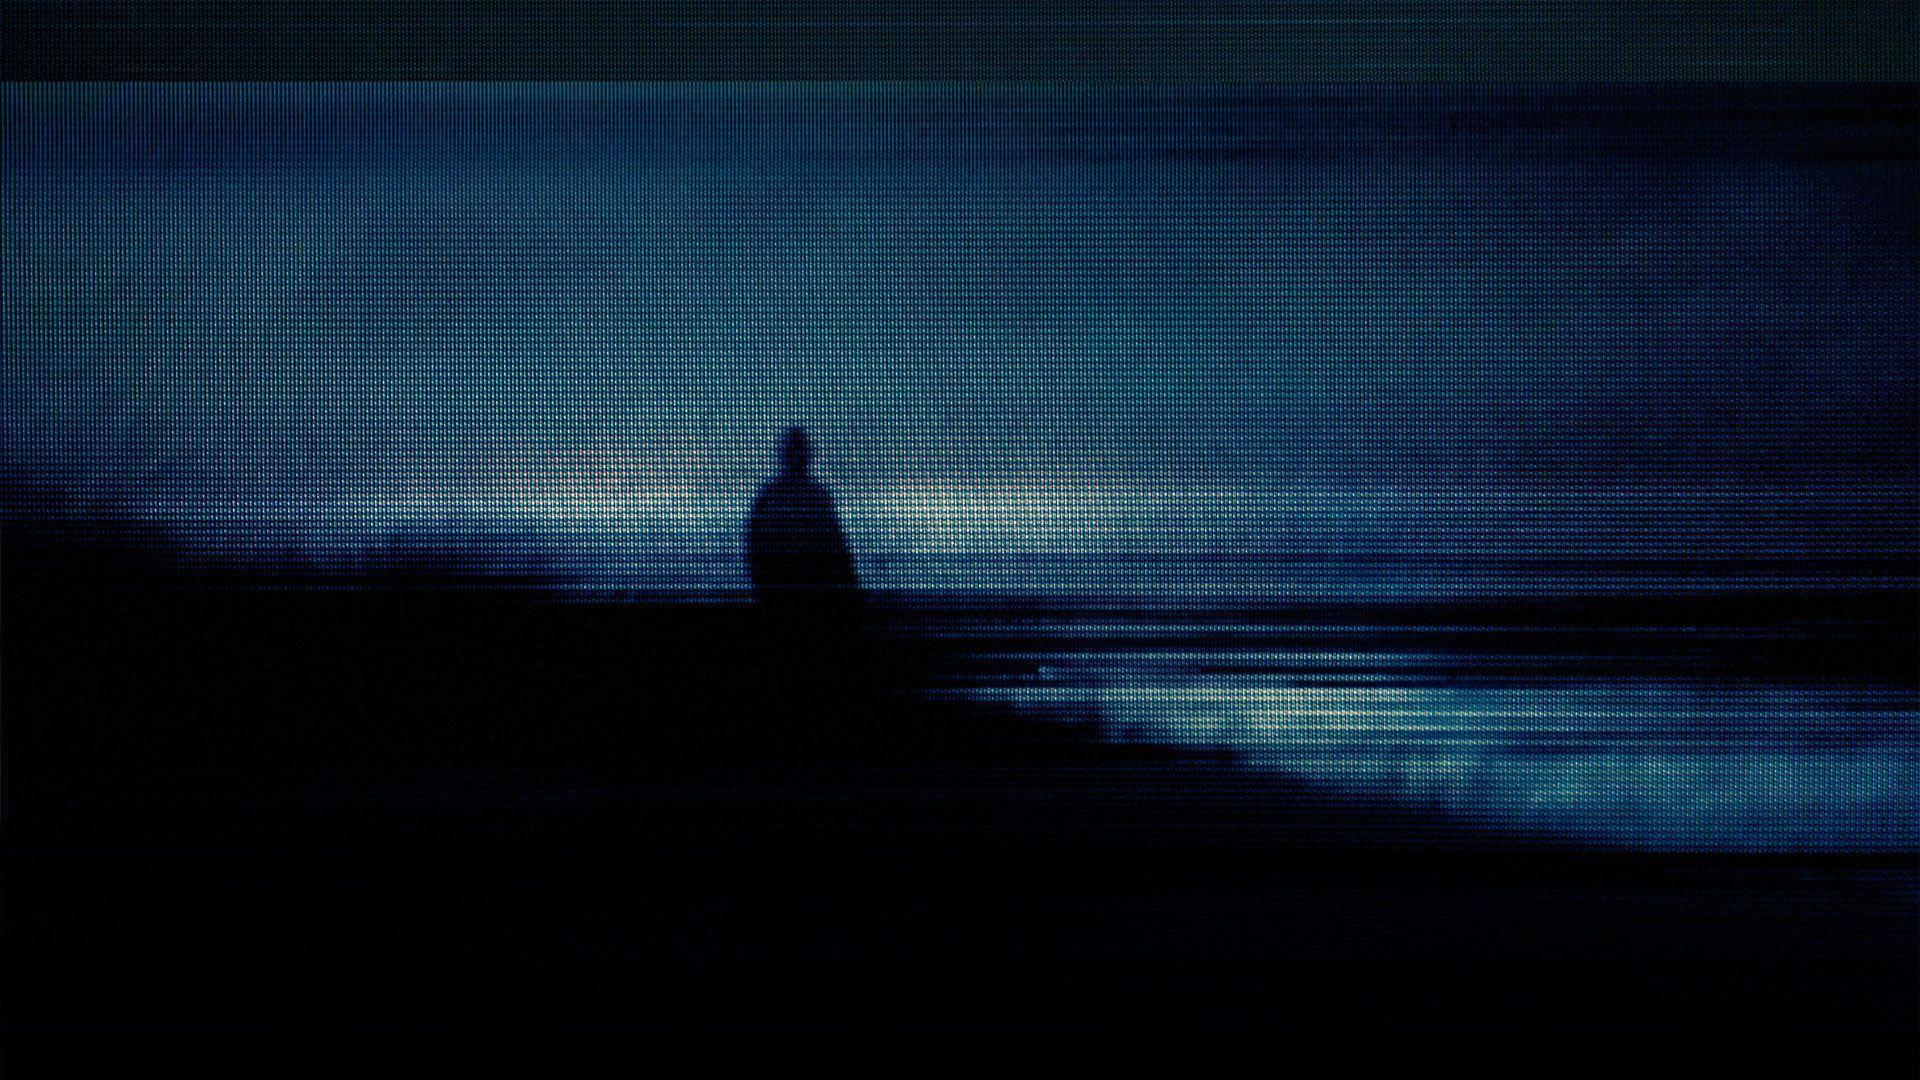 A person standing on the beach at night - Dark vaporwave